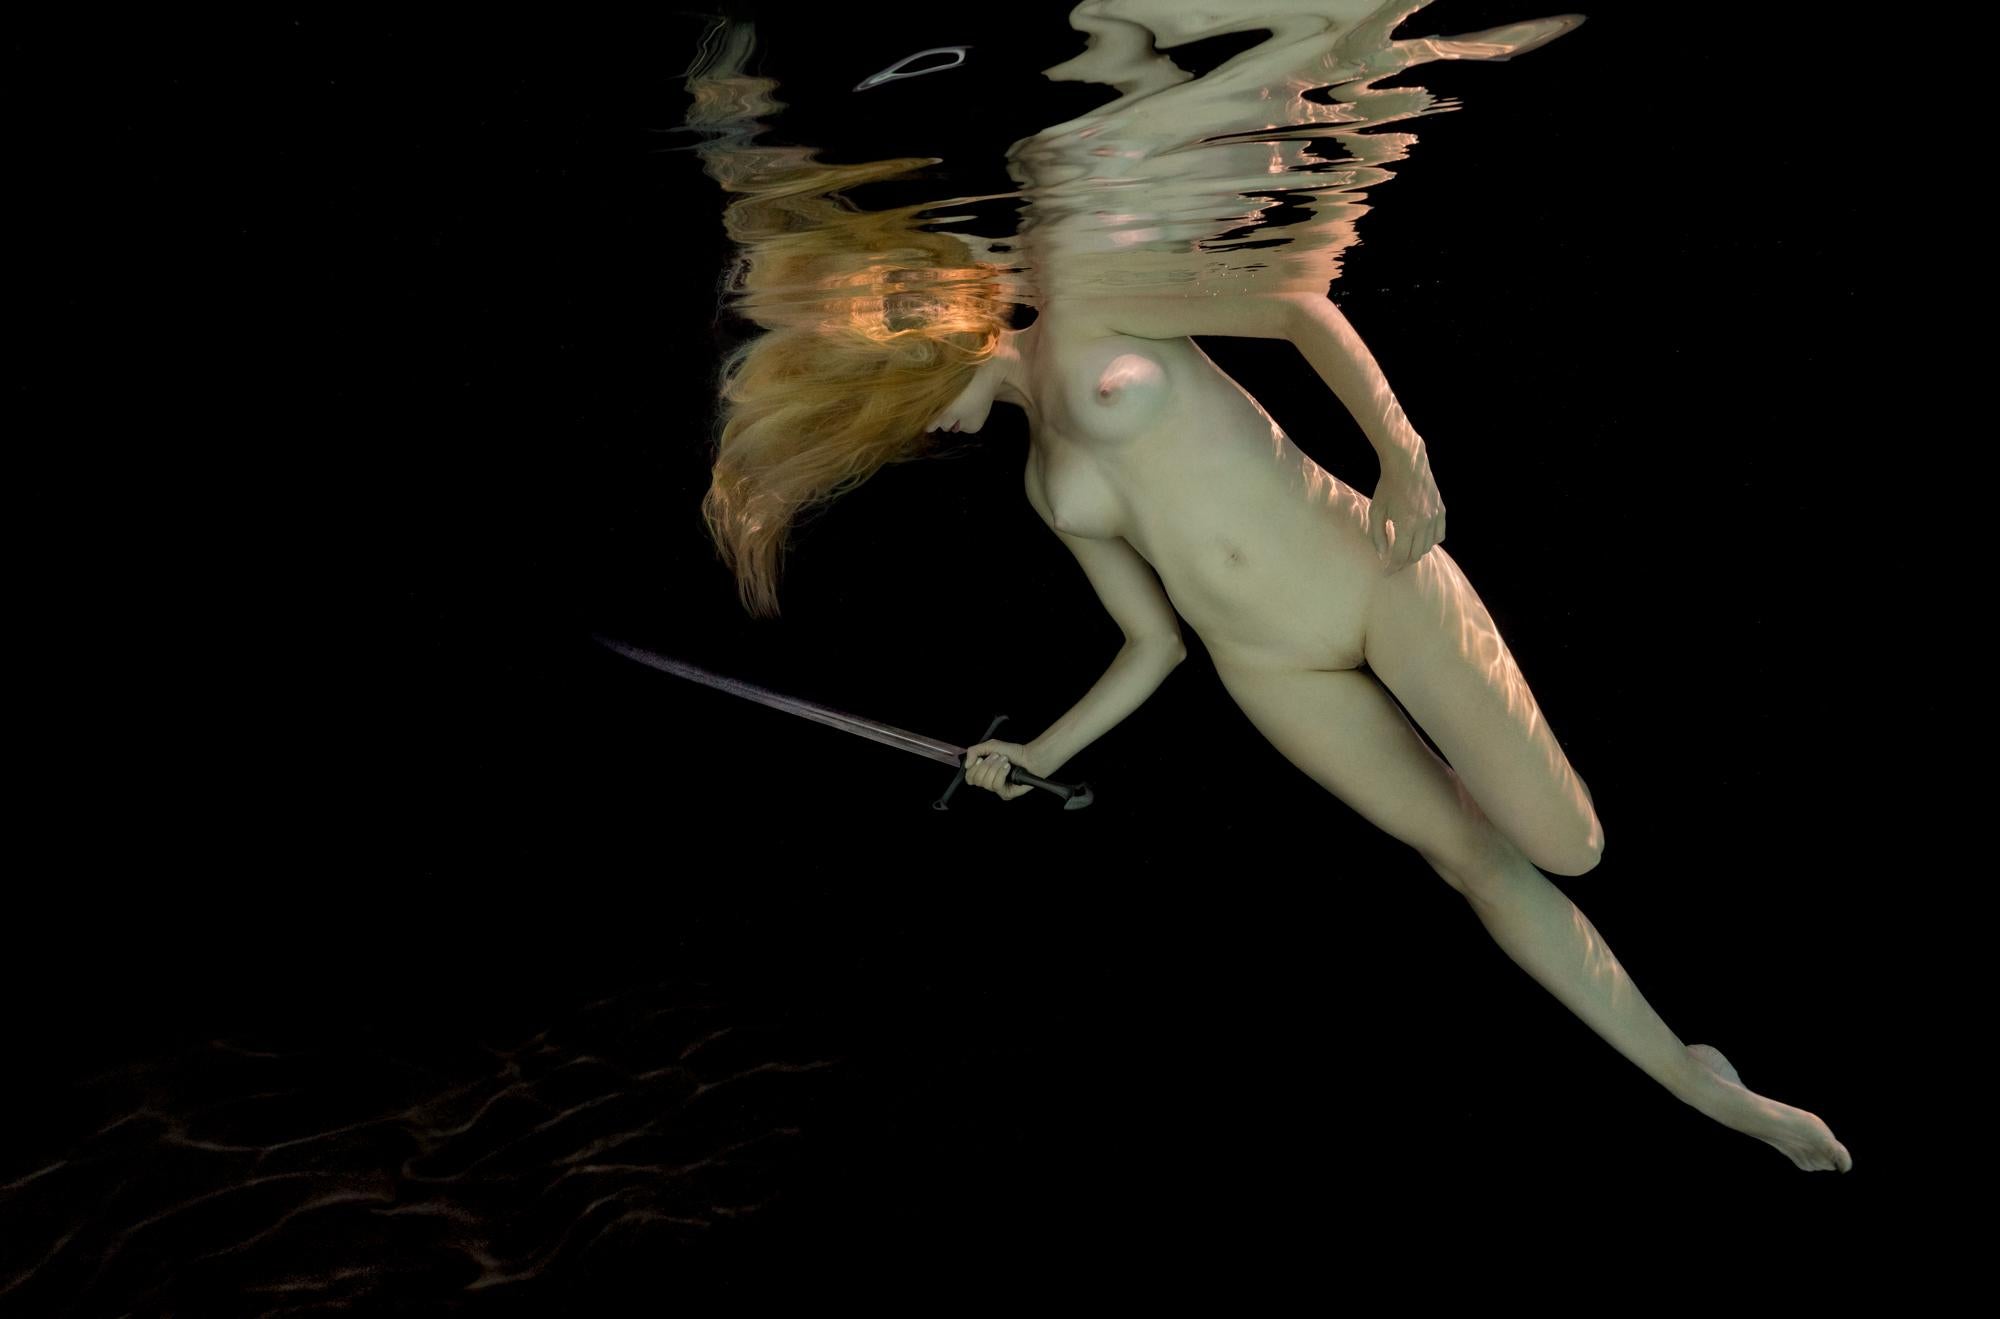 Alex Sher Nude Photograph - Athena - underwater nude photograph - archival pigment print